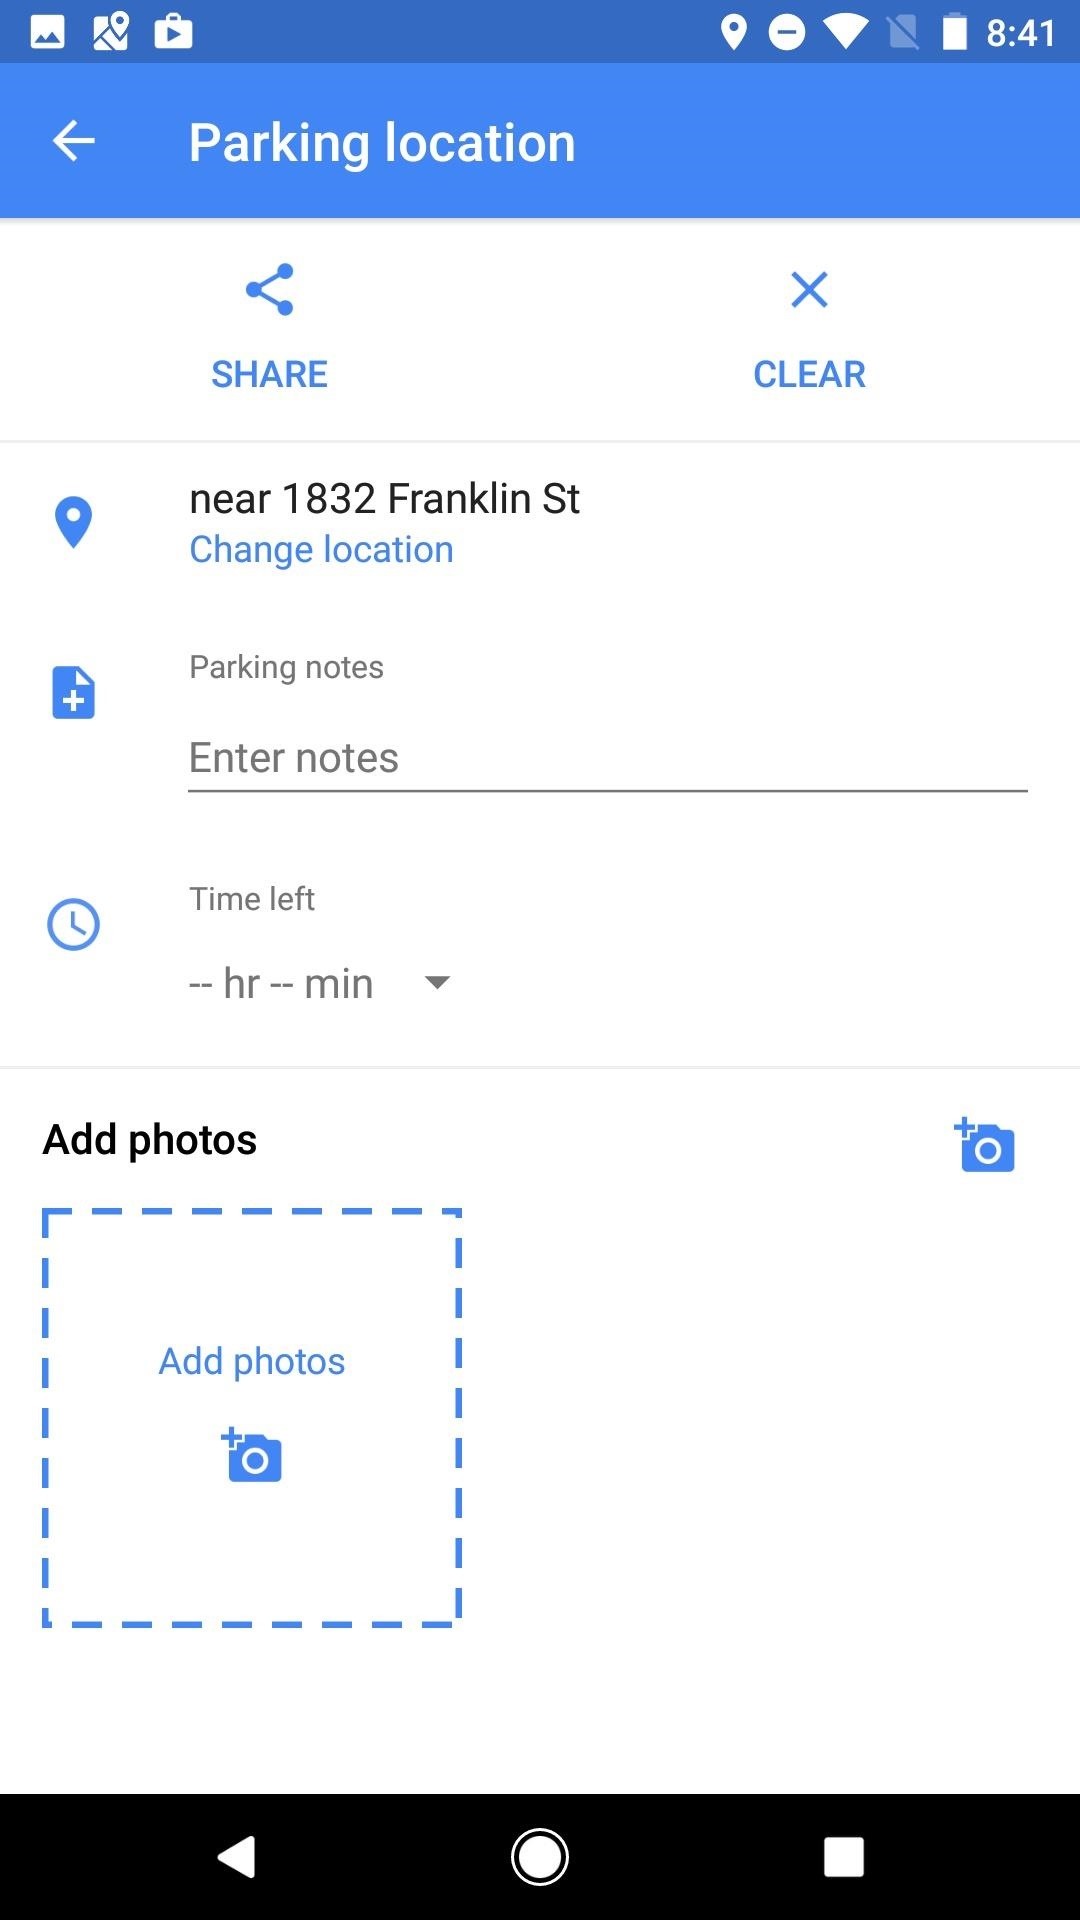 Google Maps V9.49 Beta Gets a Manual Parking Location Tracker & Weather Indicator